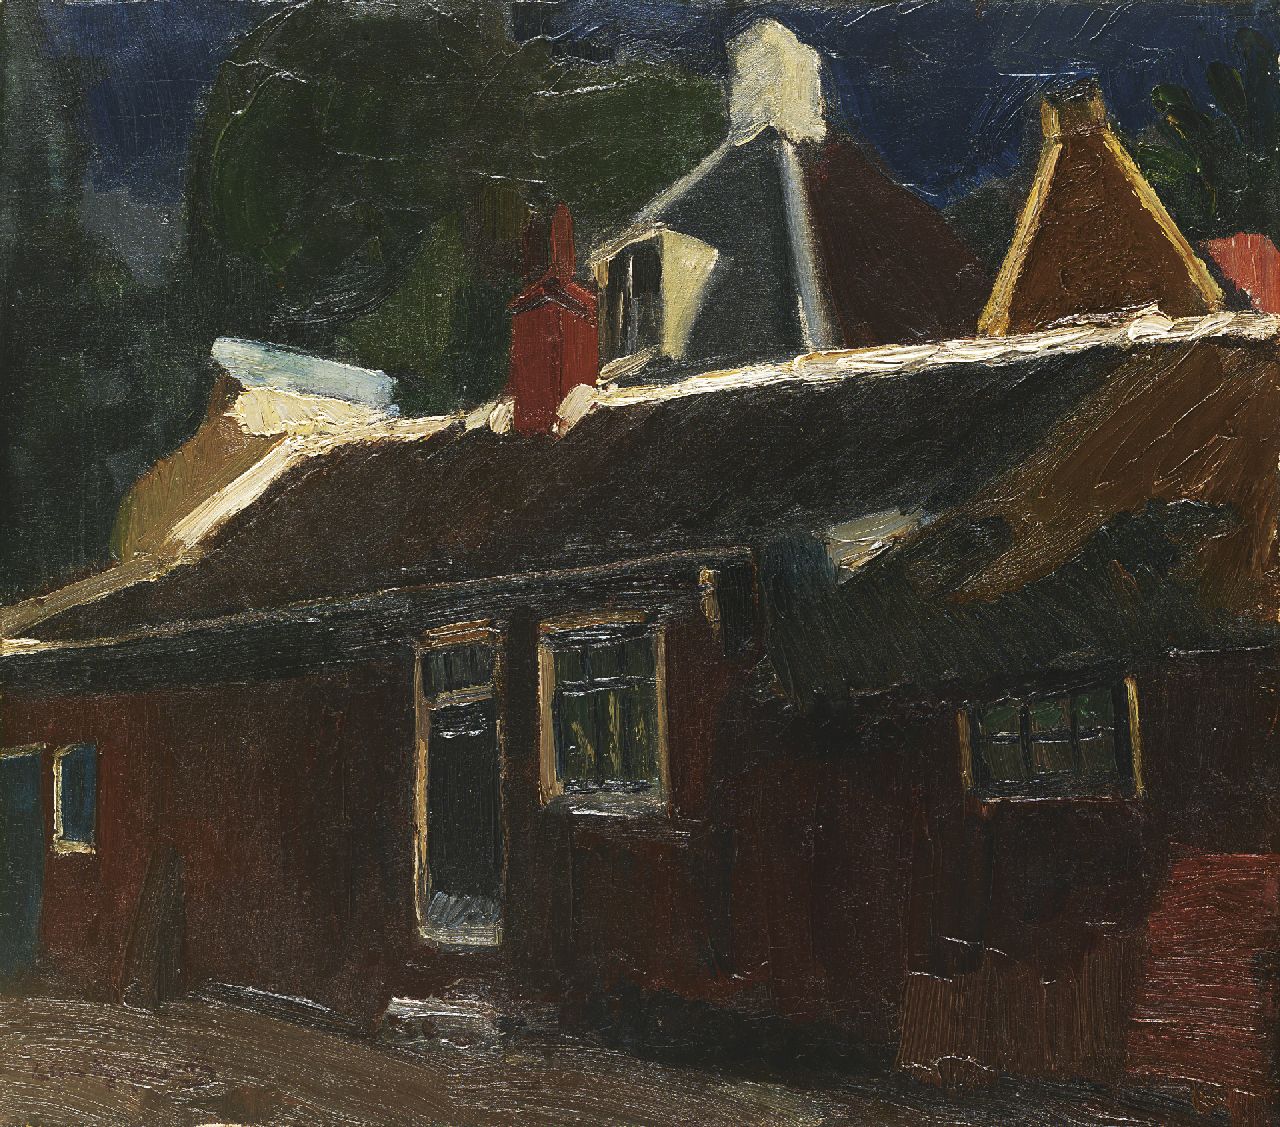 Wijngaerdt P.T. van | Petrus Theodorus 'Piet' van Wijngaerdt | Paintings offered for sale | Houses and red barn, oil on canvas 51.5 x 58.2 cm, signed l.l. and painted circa 1915